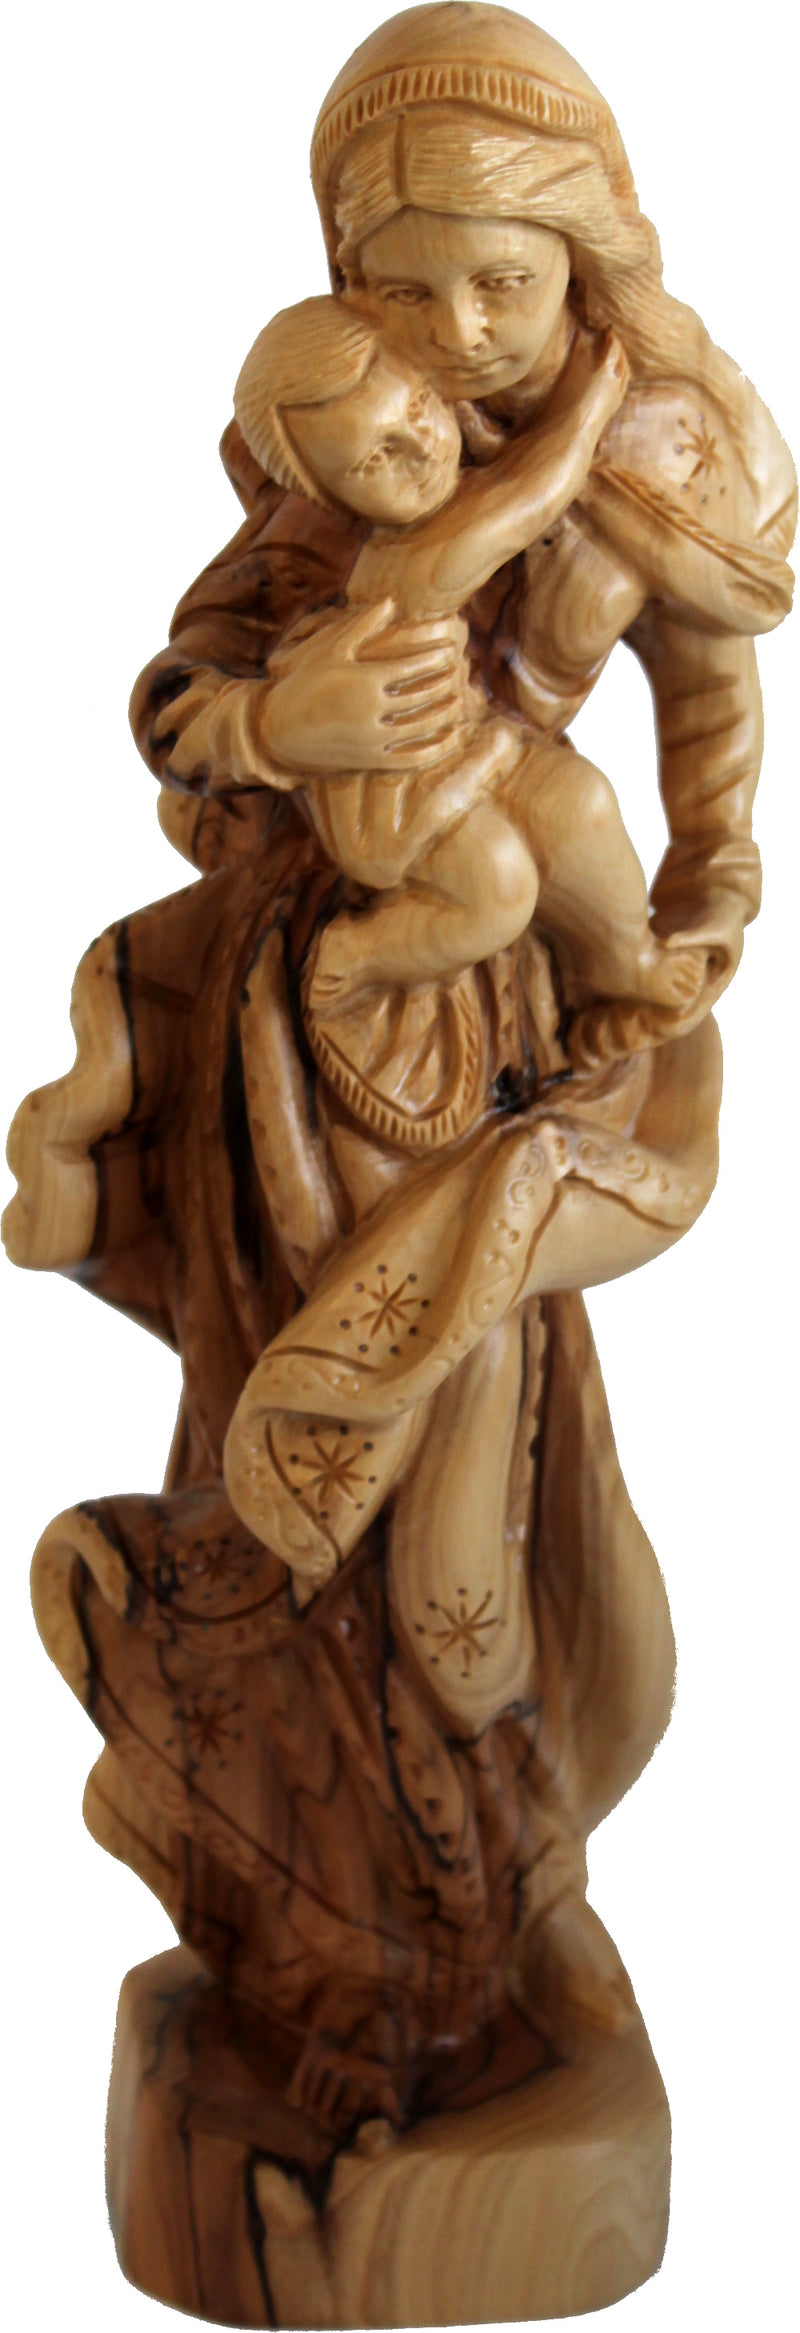 Grade A - Stand of Mary with Baby Jesus - Olivewood (27 cm or 10.5 inches)